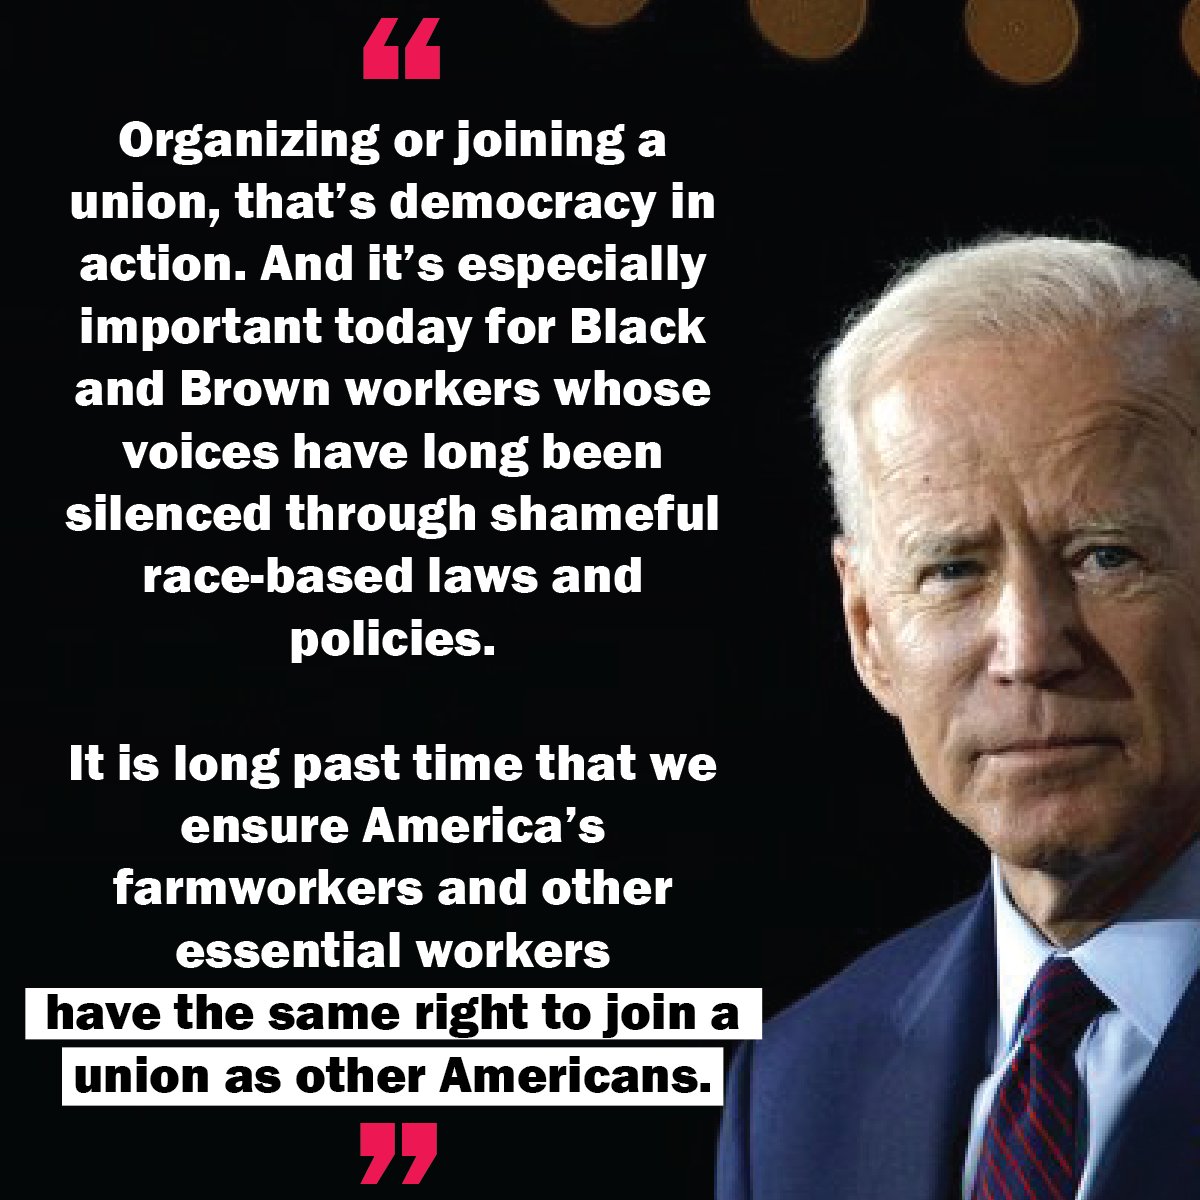 YESSS! President Biden gets it! All working people -- Black, brown, white AND regardless of immigration status -- should have the right to form a #union, but that's not the case under current labor law. Let's change the rules! #UnionsForAll #LaborDay #1u #AB2183 @UFWupdates